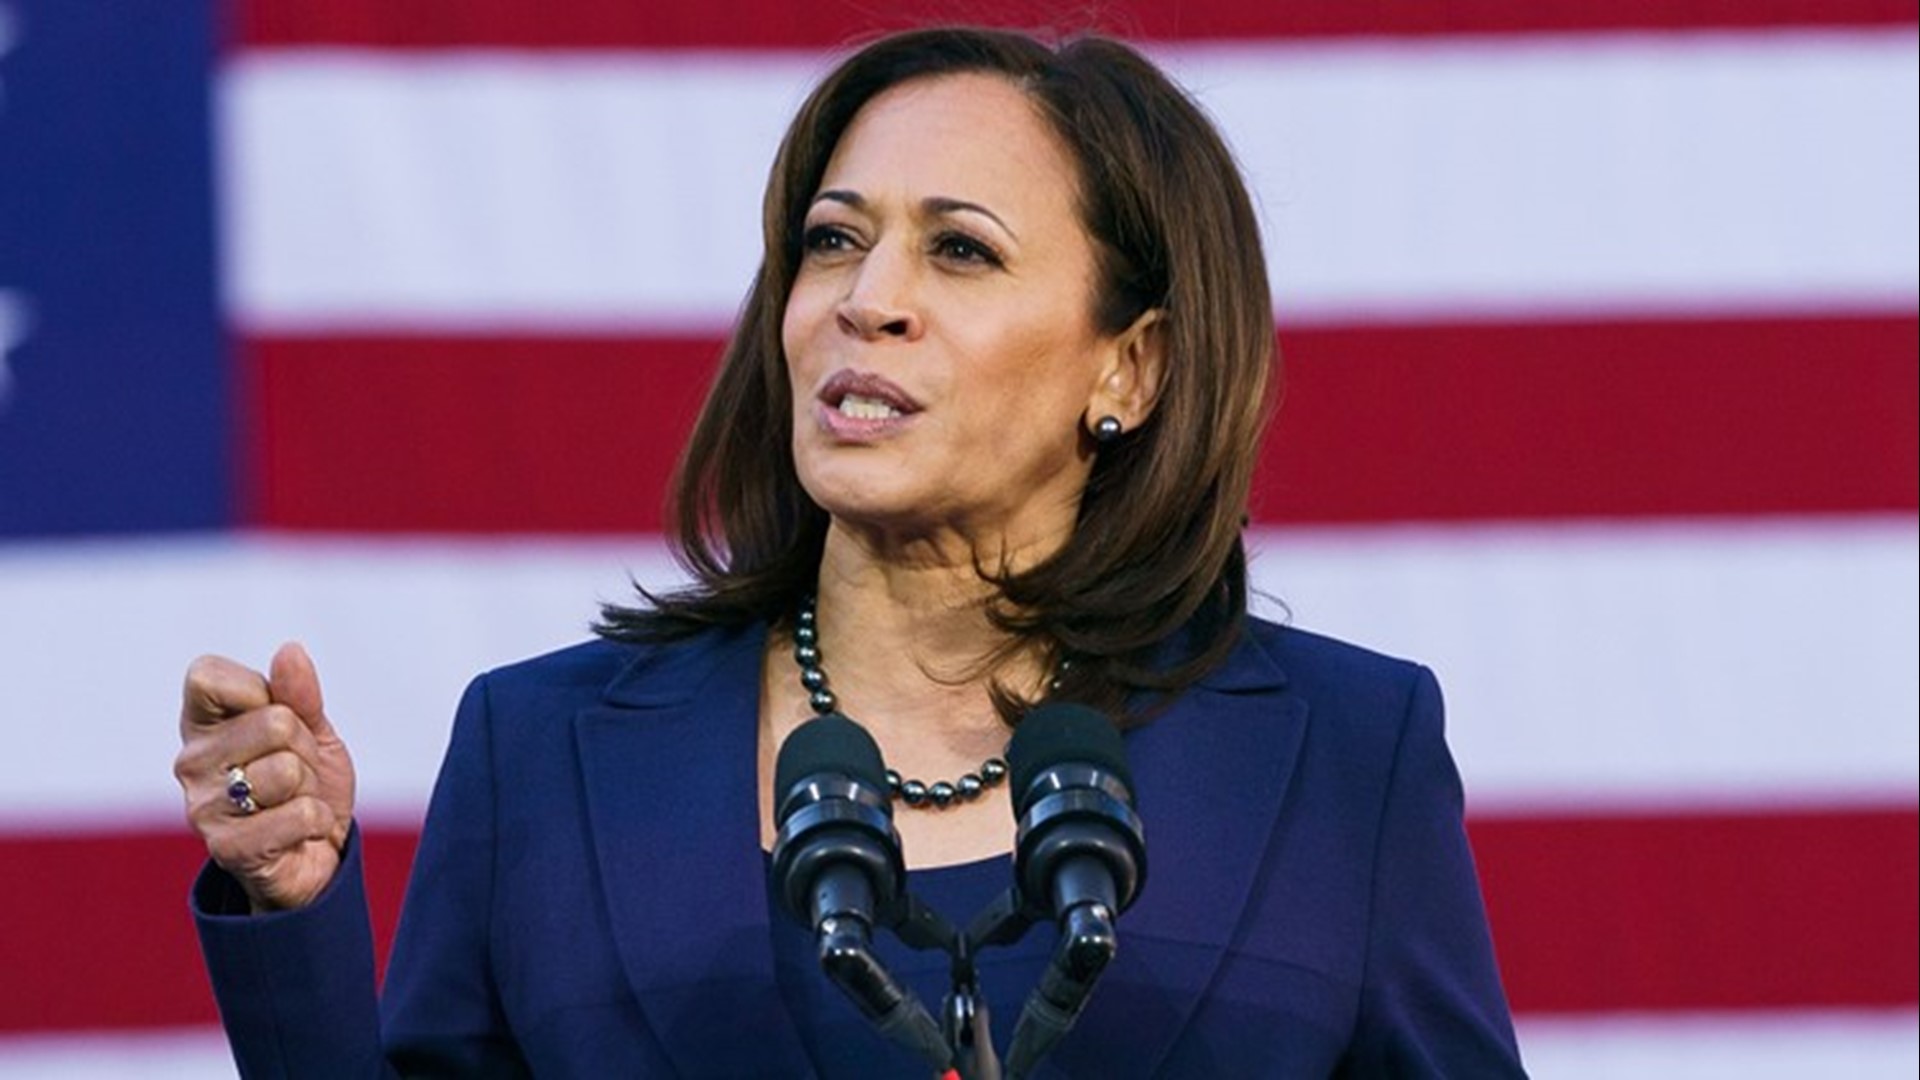 Harris is the first Black woman to join a major party ticket in U.S. history.